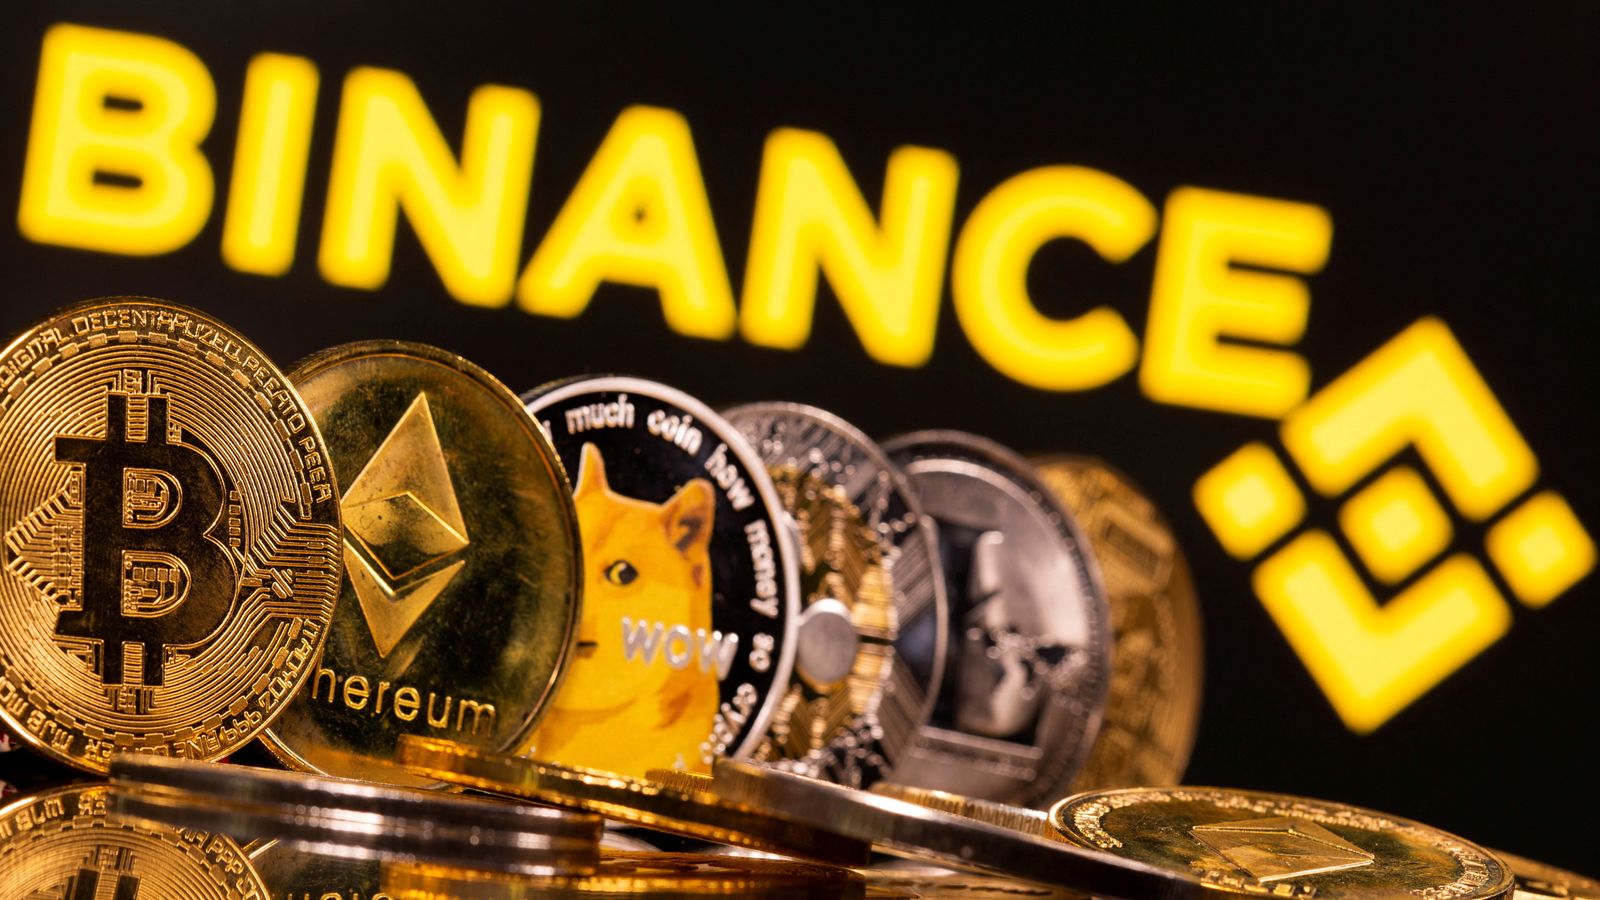 Binance CEO Changpeng Zhao steps down - and pleads guilty to criminal charges